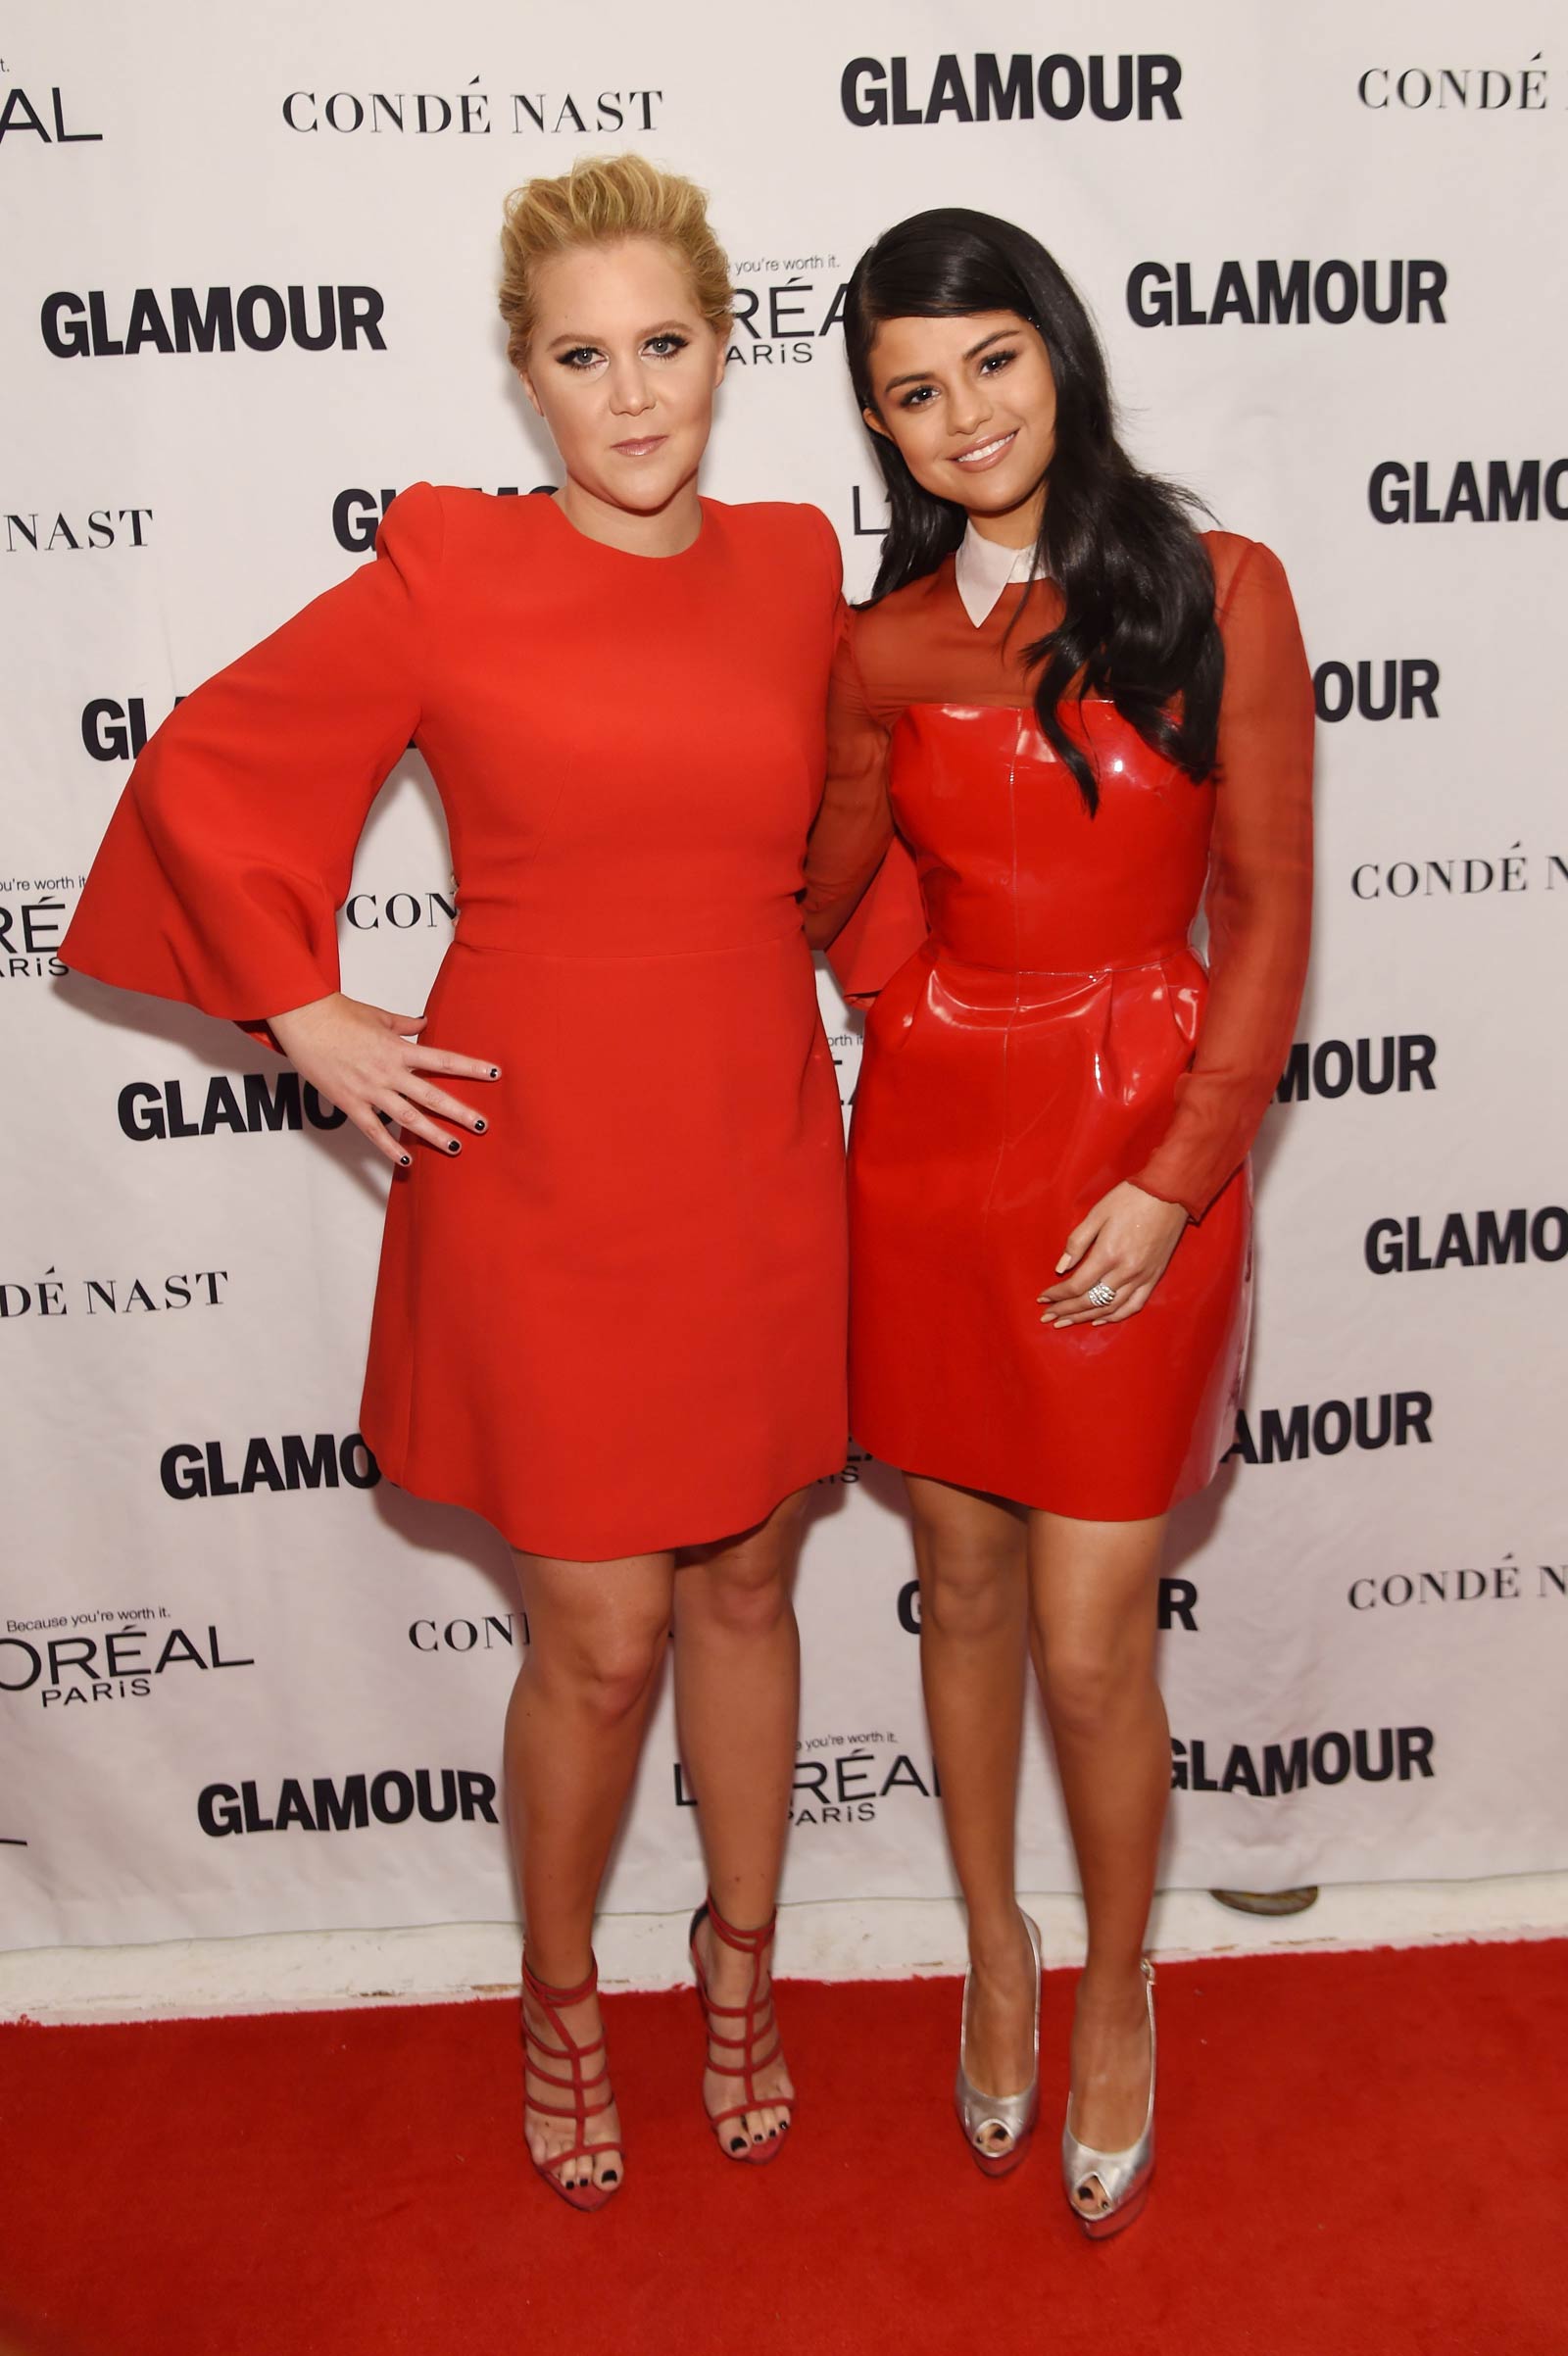 Selena Gomez attends 25th Annual Glamour Women of the Year Awards